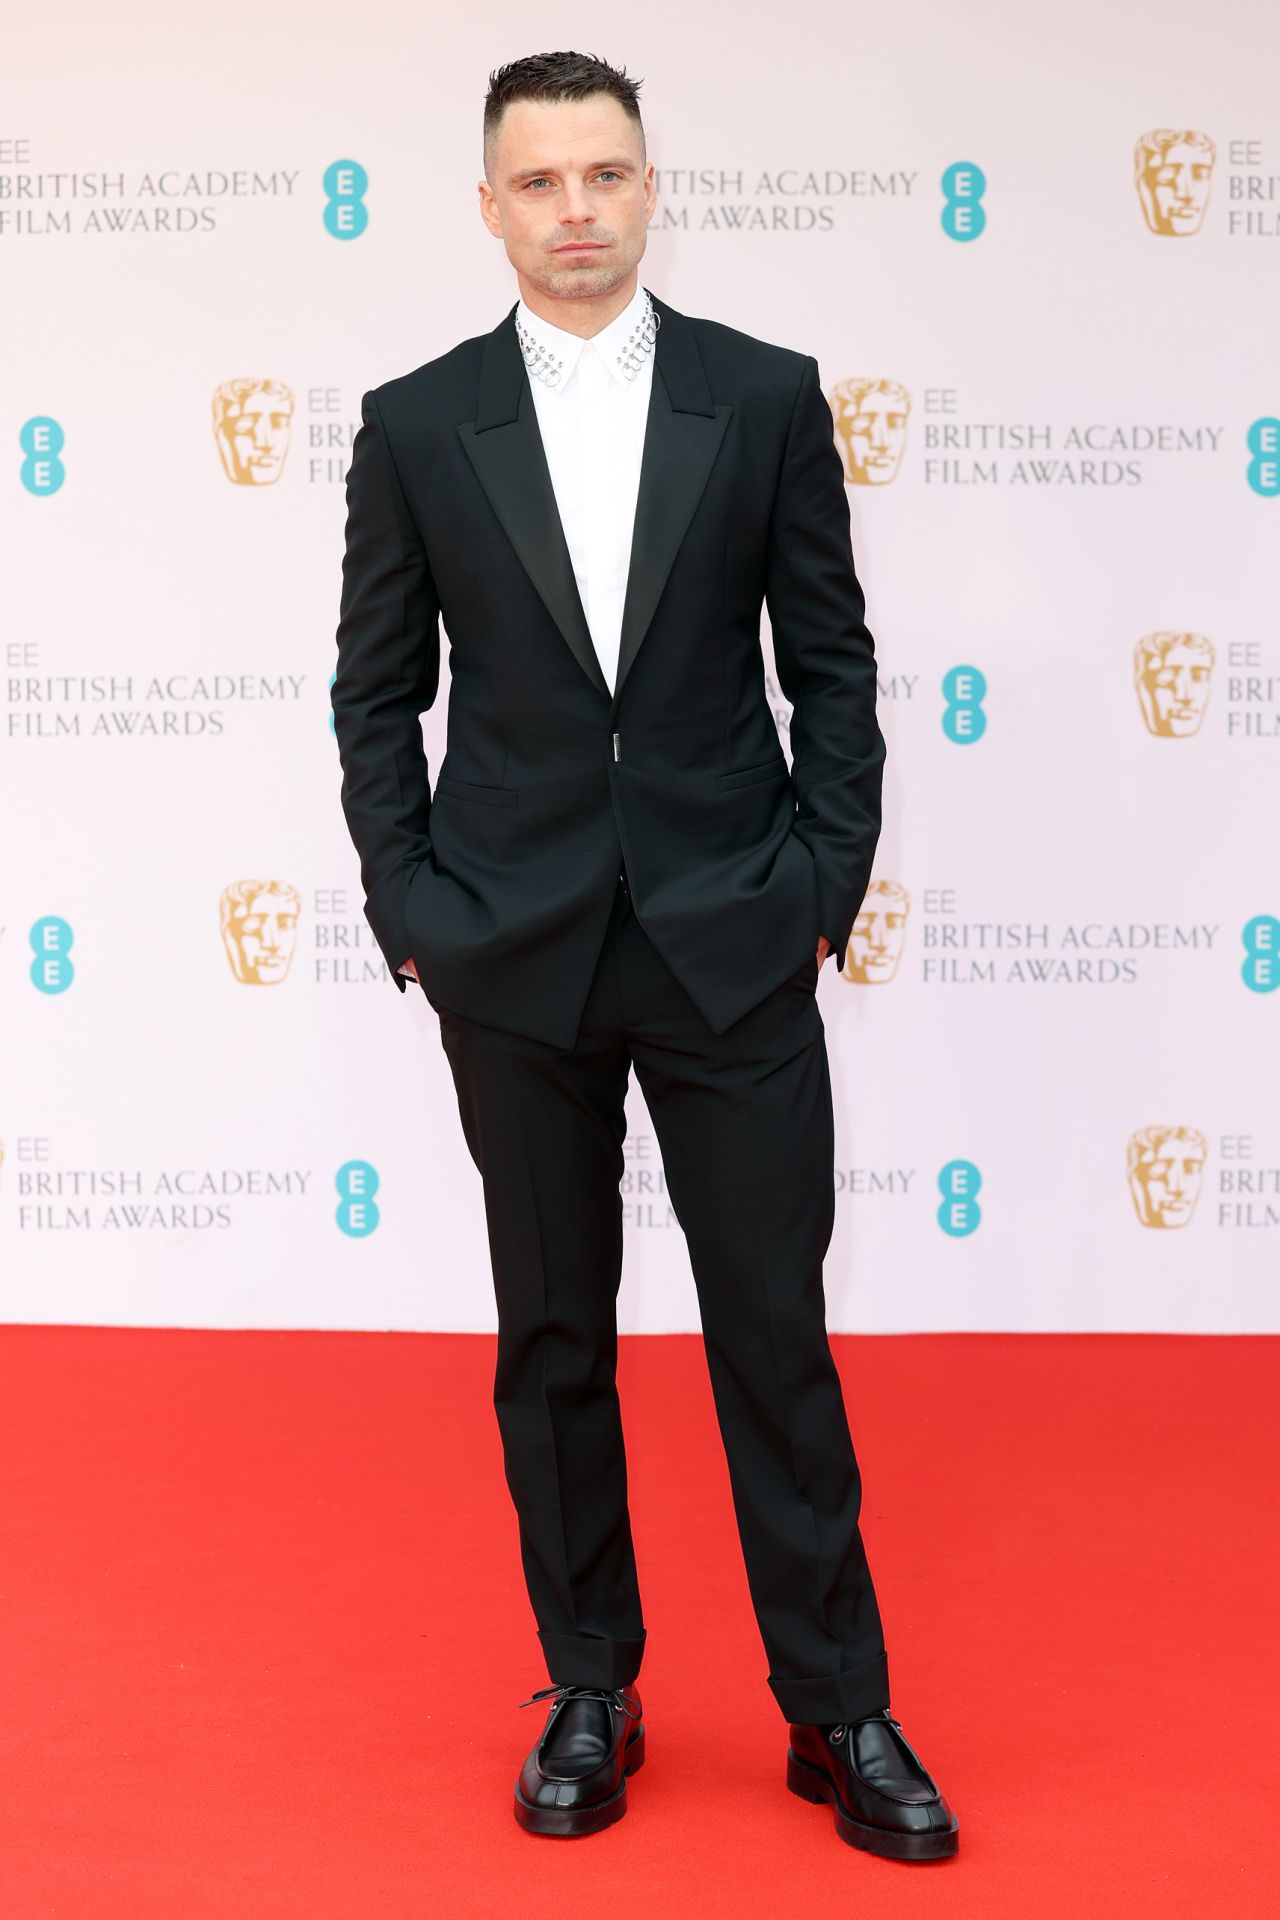 Sebastian Stan attends the BAFTAs at Royal Albert Hall on March 13, 2022 in London, England. (Photo by Mike Marsland/WireImage)